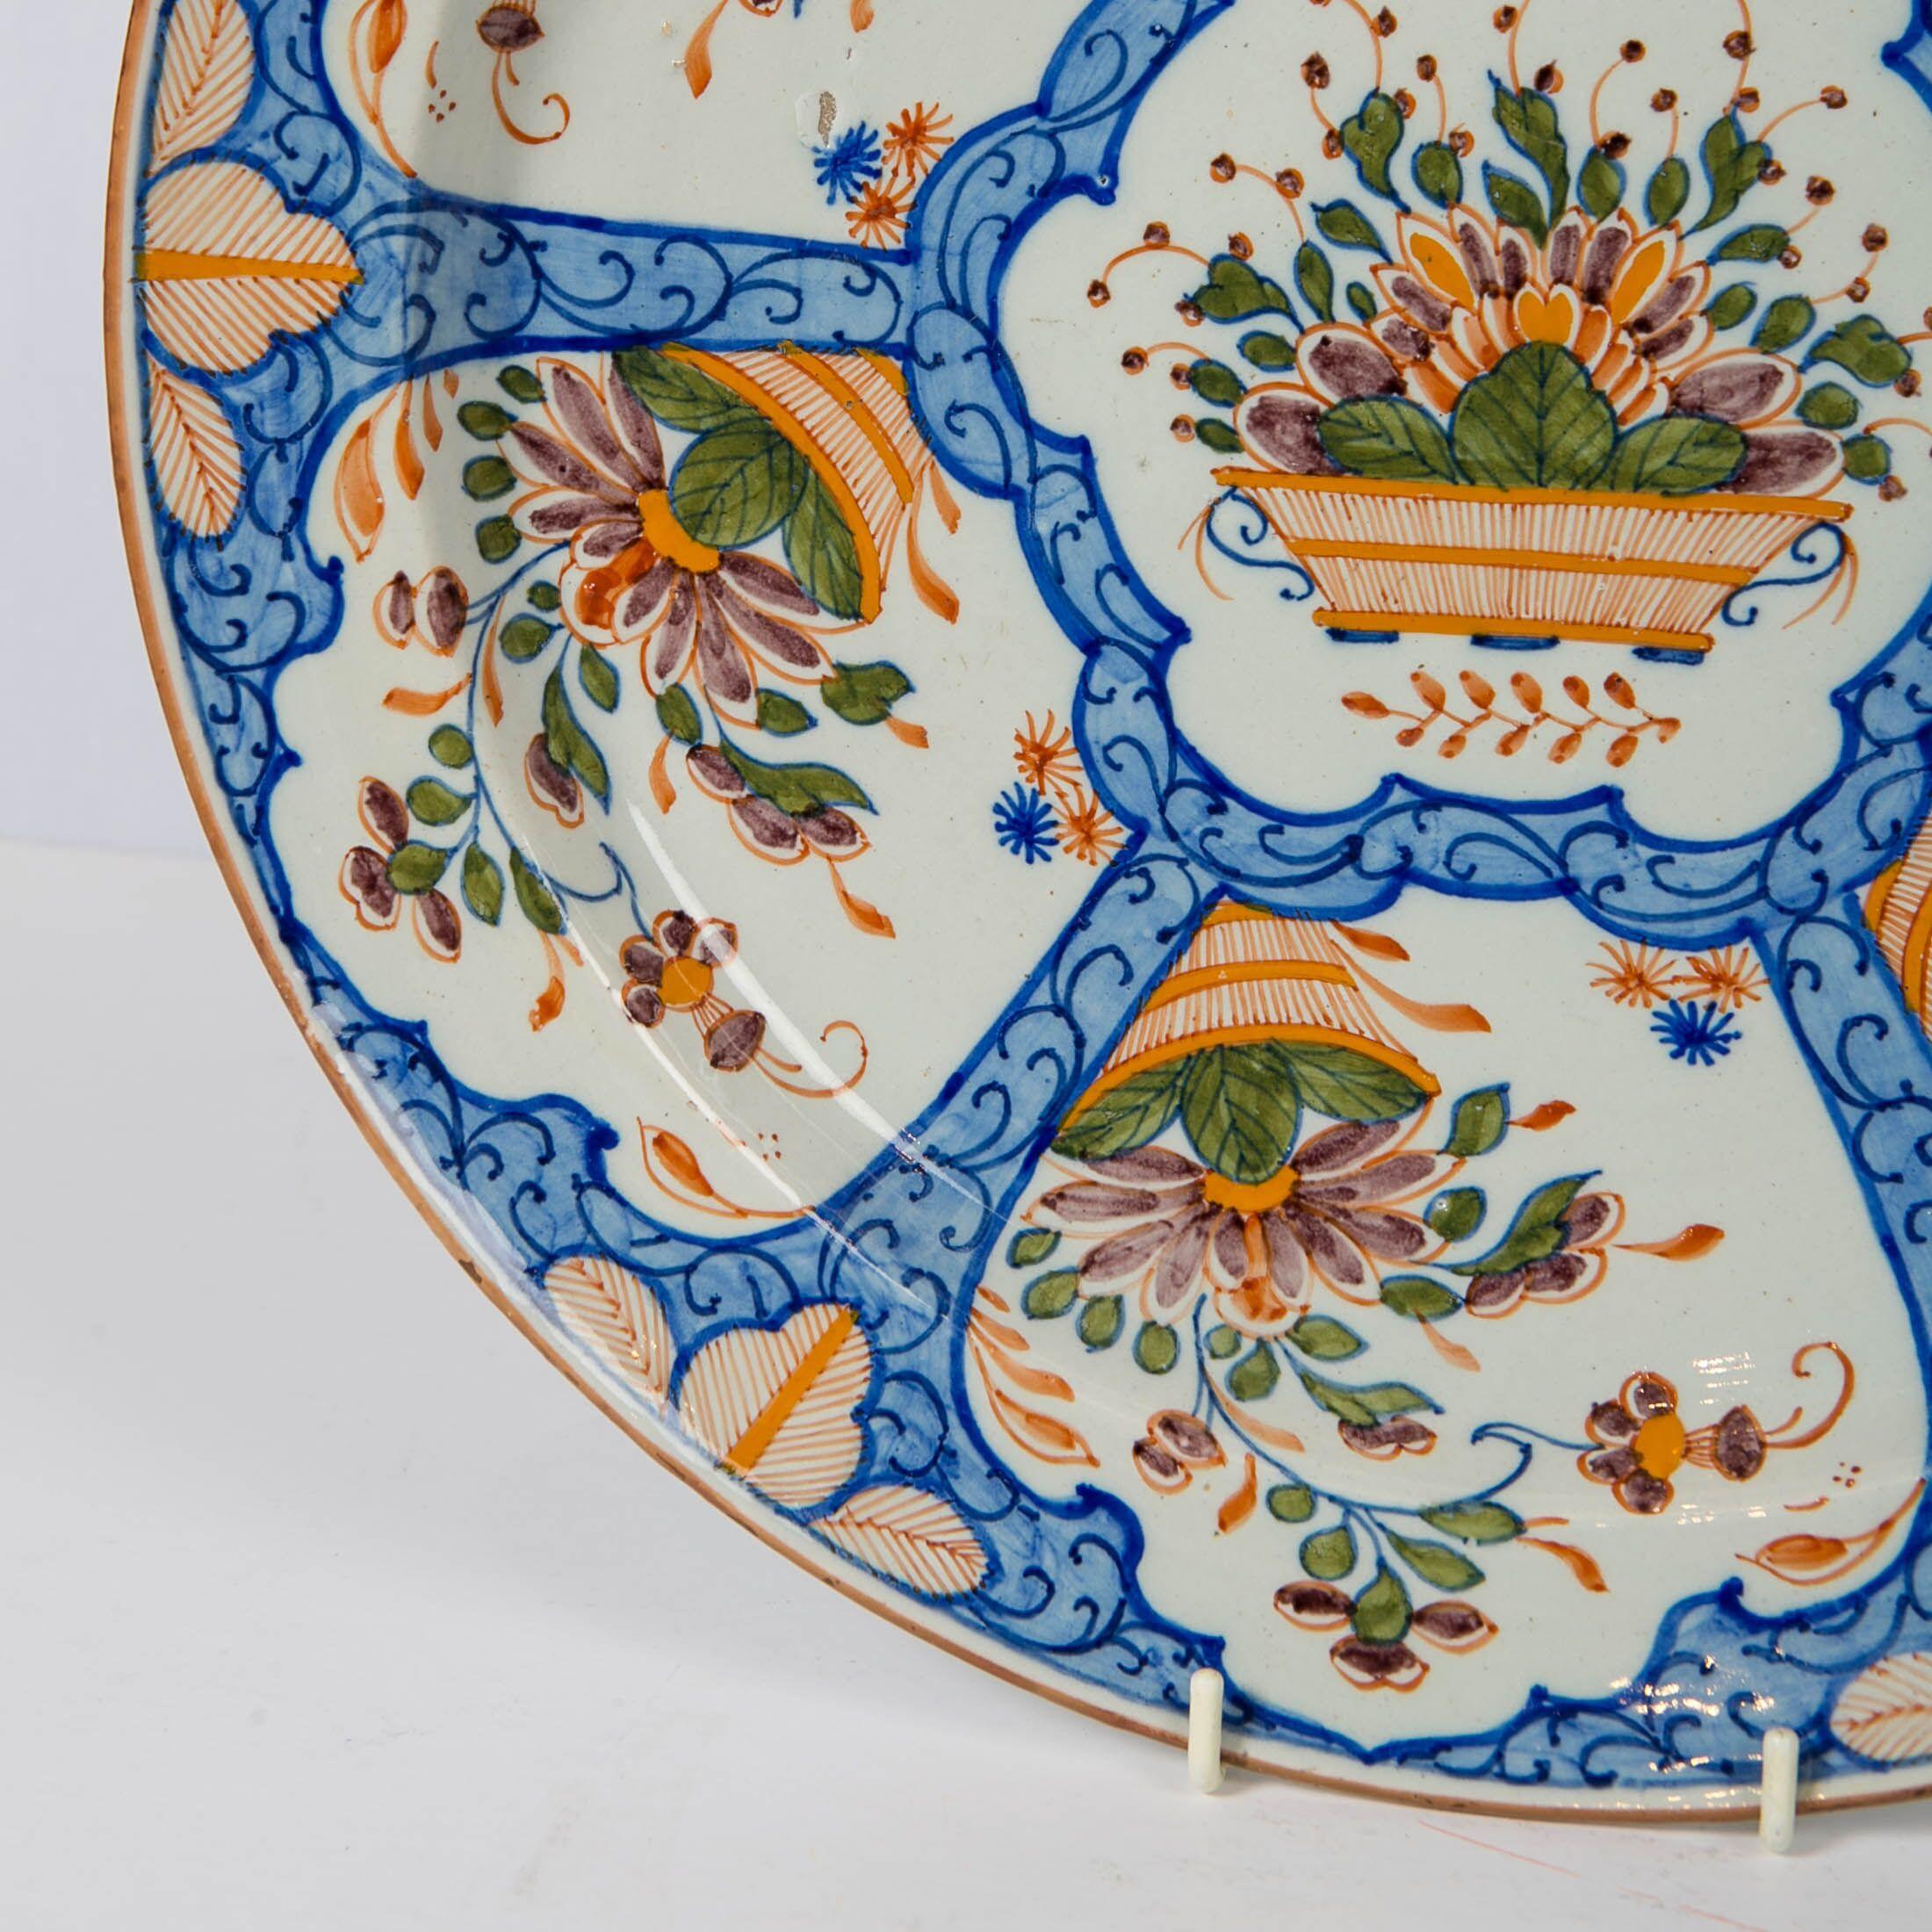 Hand-Painted Dutch Delft Charger Made circa 1820